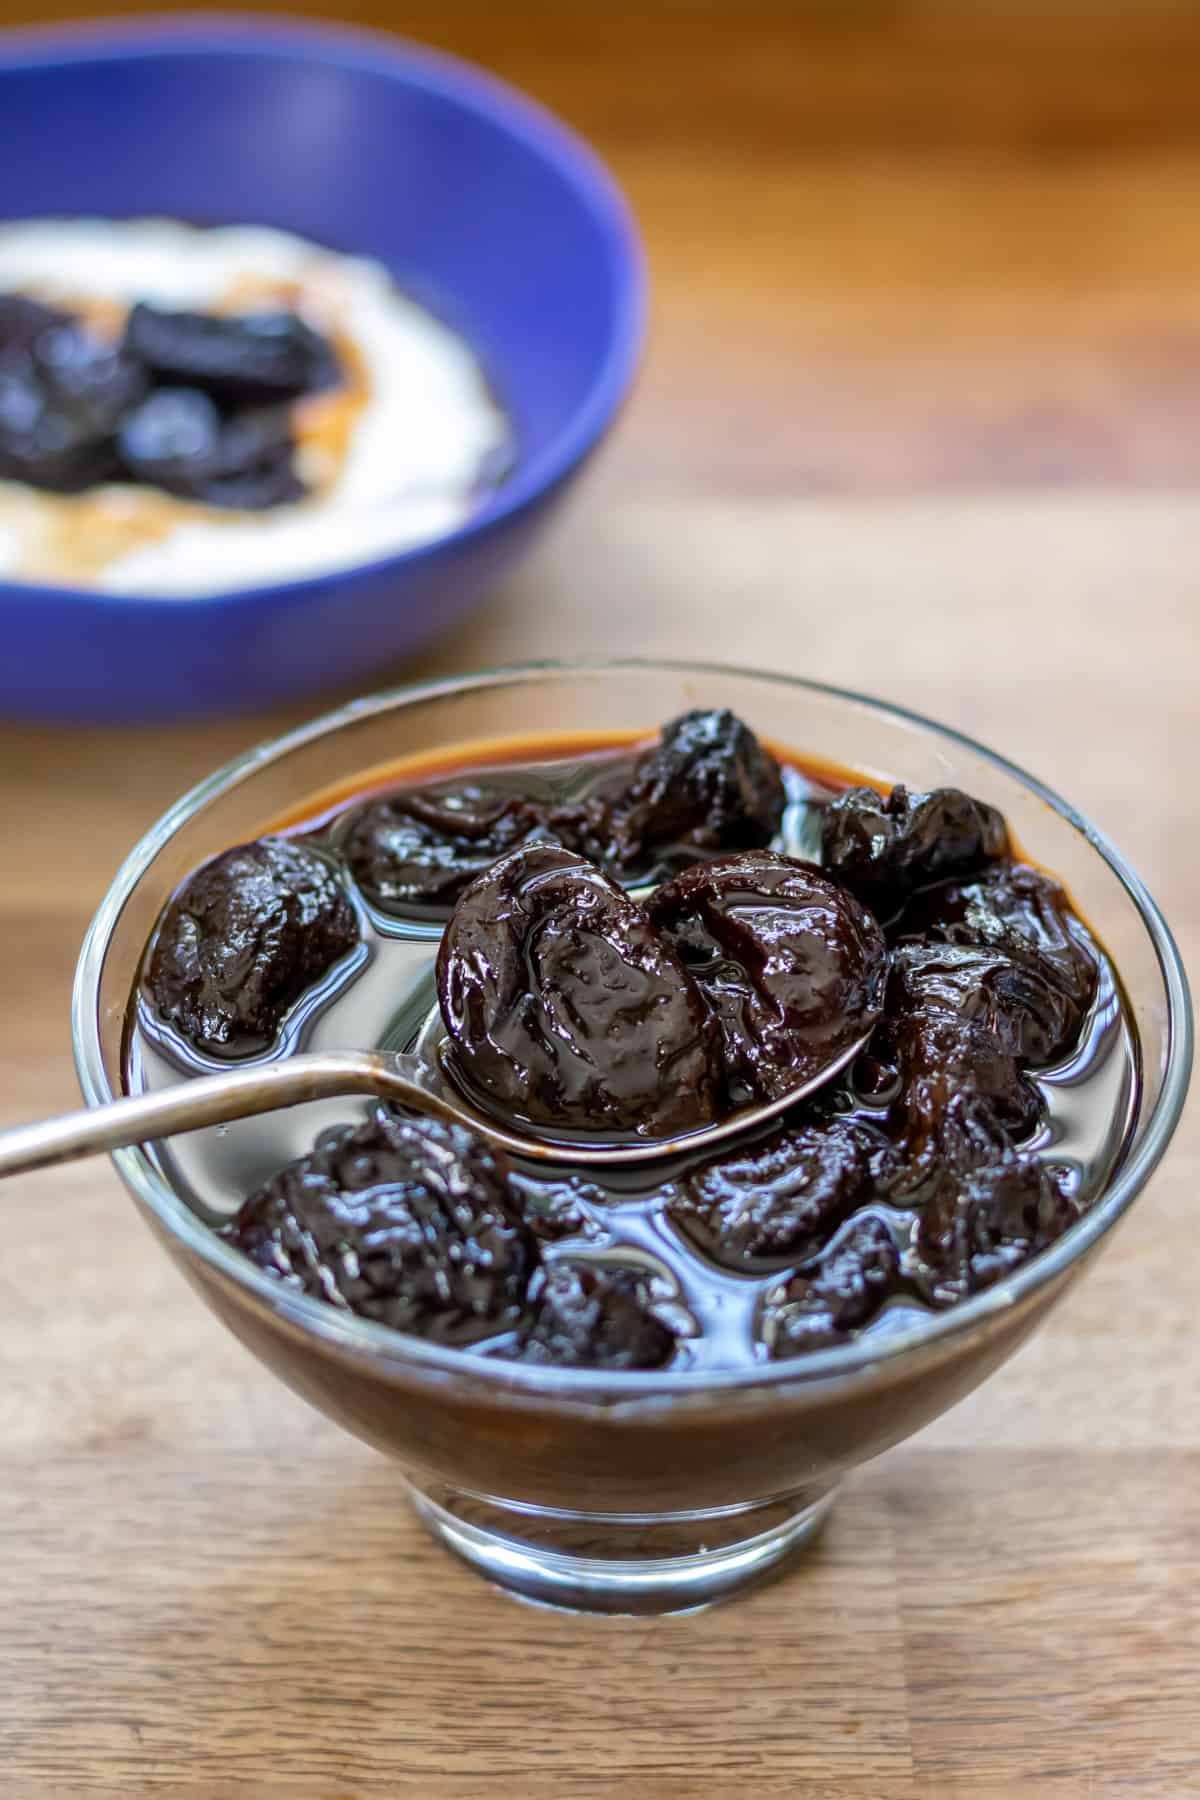 Spoon coming out of a dish of stewed prunes, with them over yogurt in a bowl in the background.